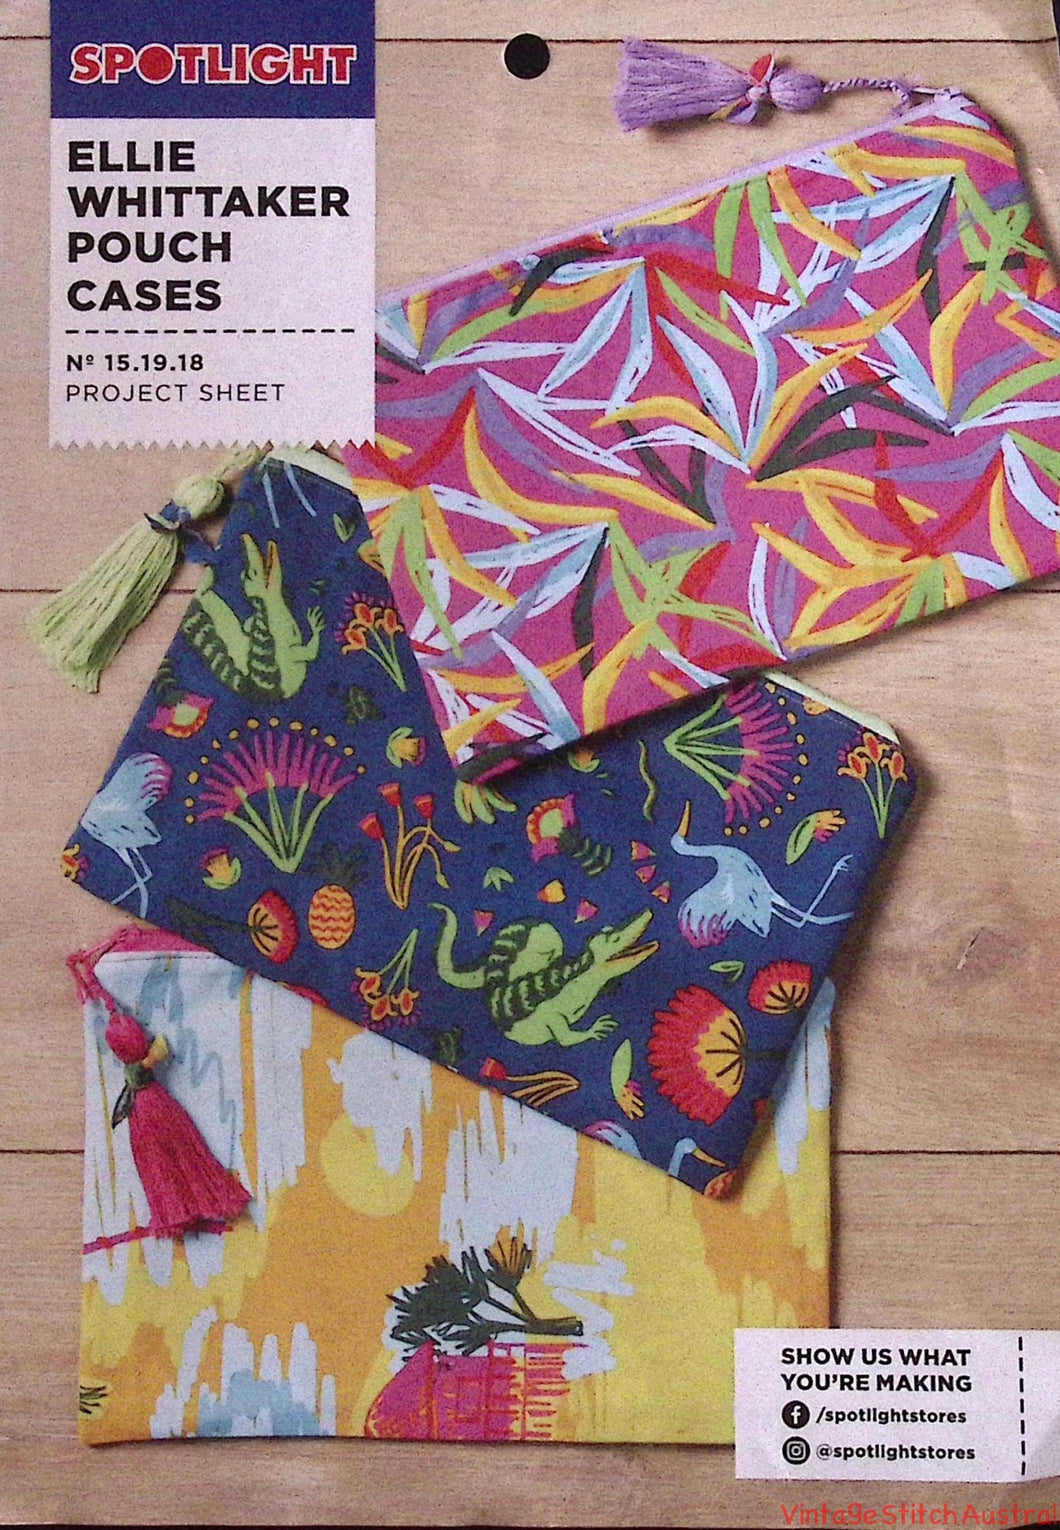 Pouch Cases Designed by Ellie Whittaker for Spotlight